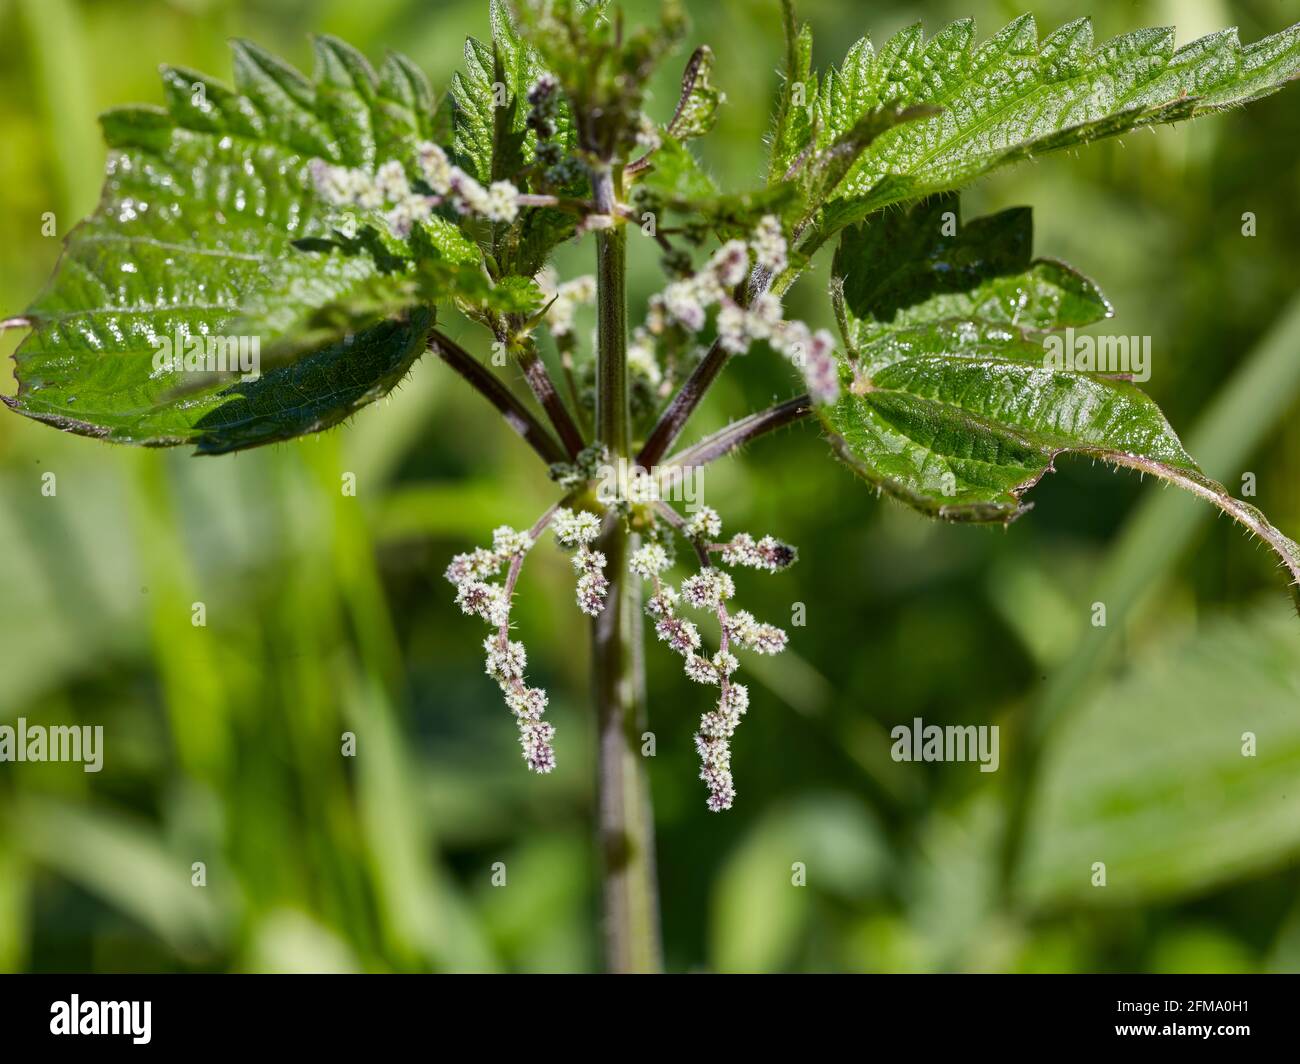 Nettle as a medicinal plant: flowering nettle Stock Photo